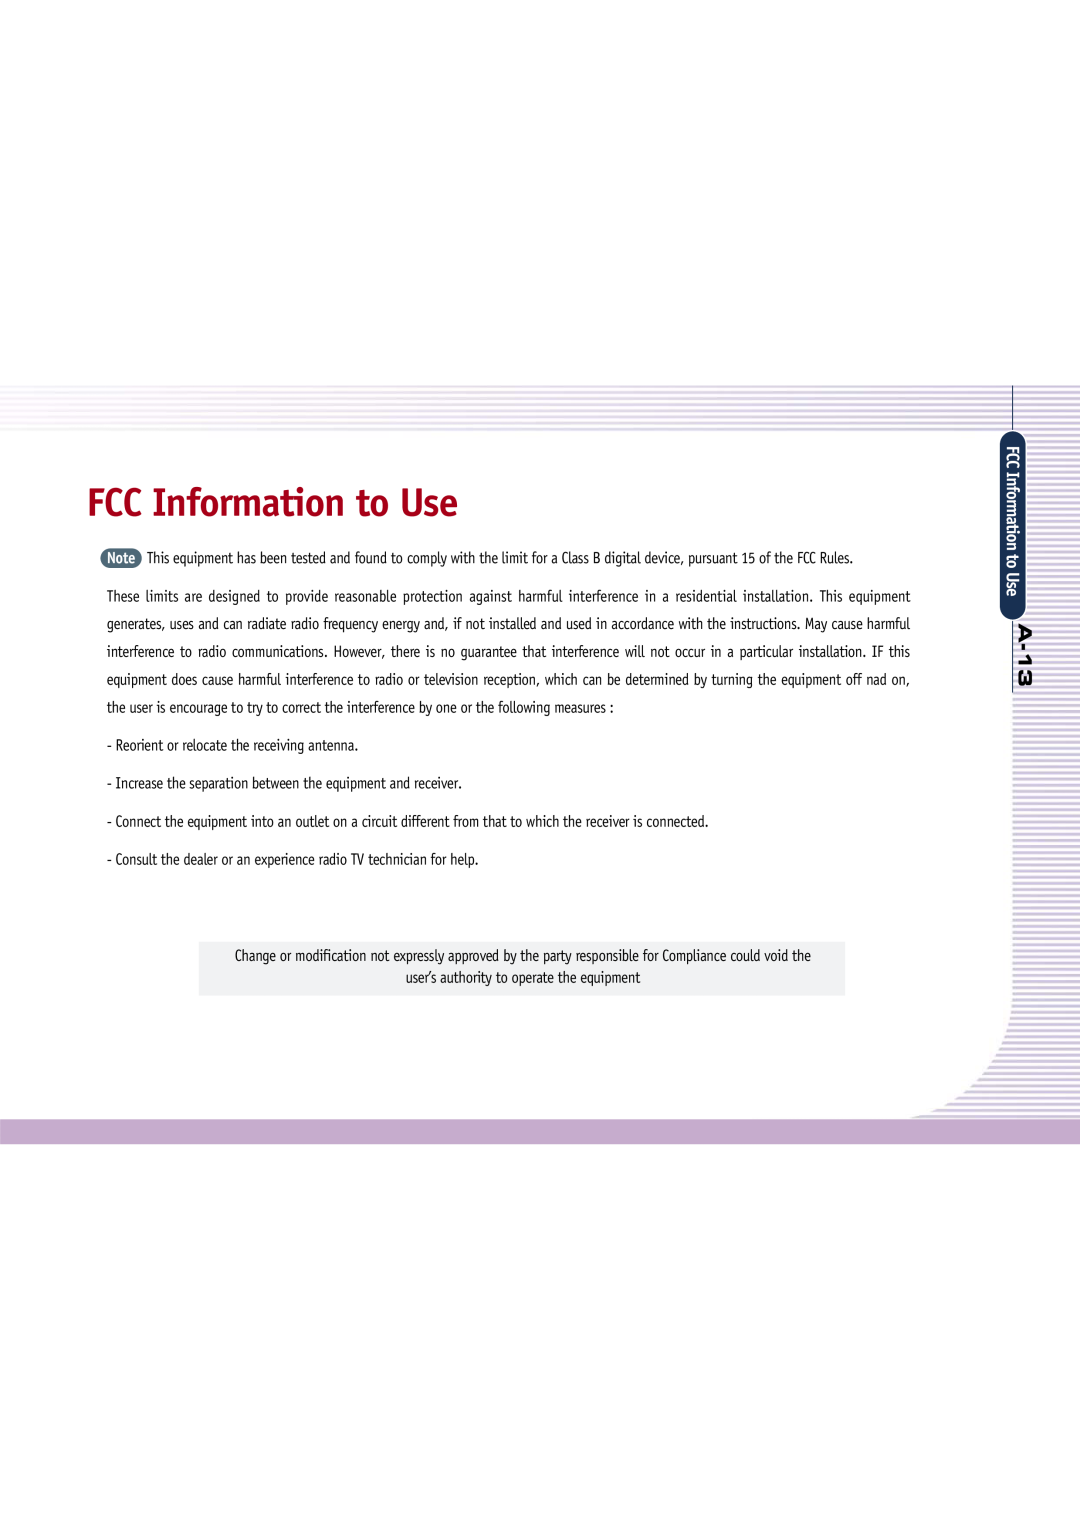 Gateway L110 manual FCC Information to Use, A-13 